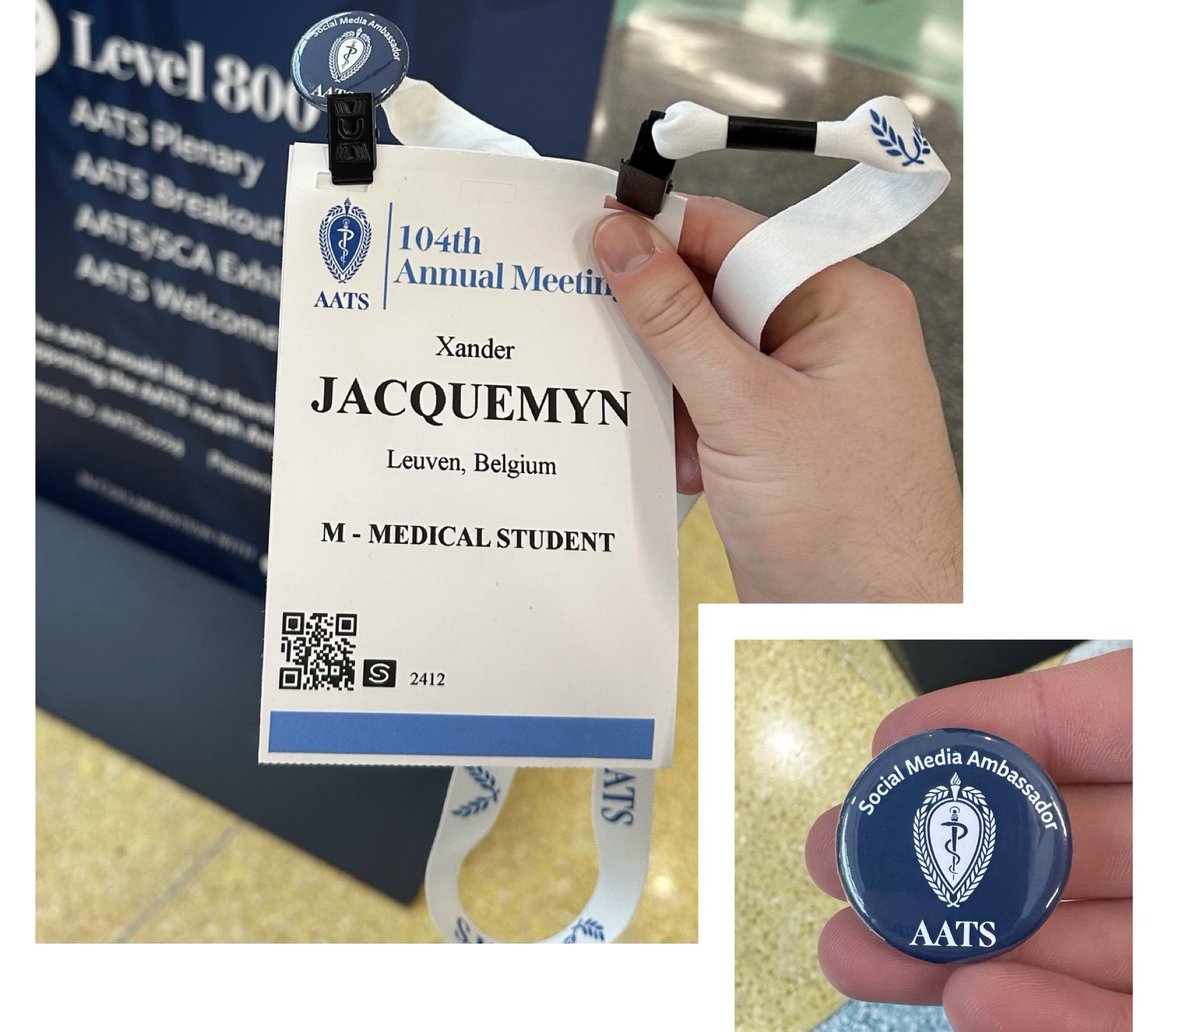 ⏱️Just picked up my badge here at #AATS2024! Looking forward to an exciting meeting @AATSHQ 🔥peep the little social media ambassador button! 
@HviUpmc @UPMC_CTSurgery @Cardio_KULeuven